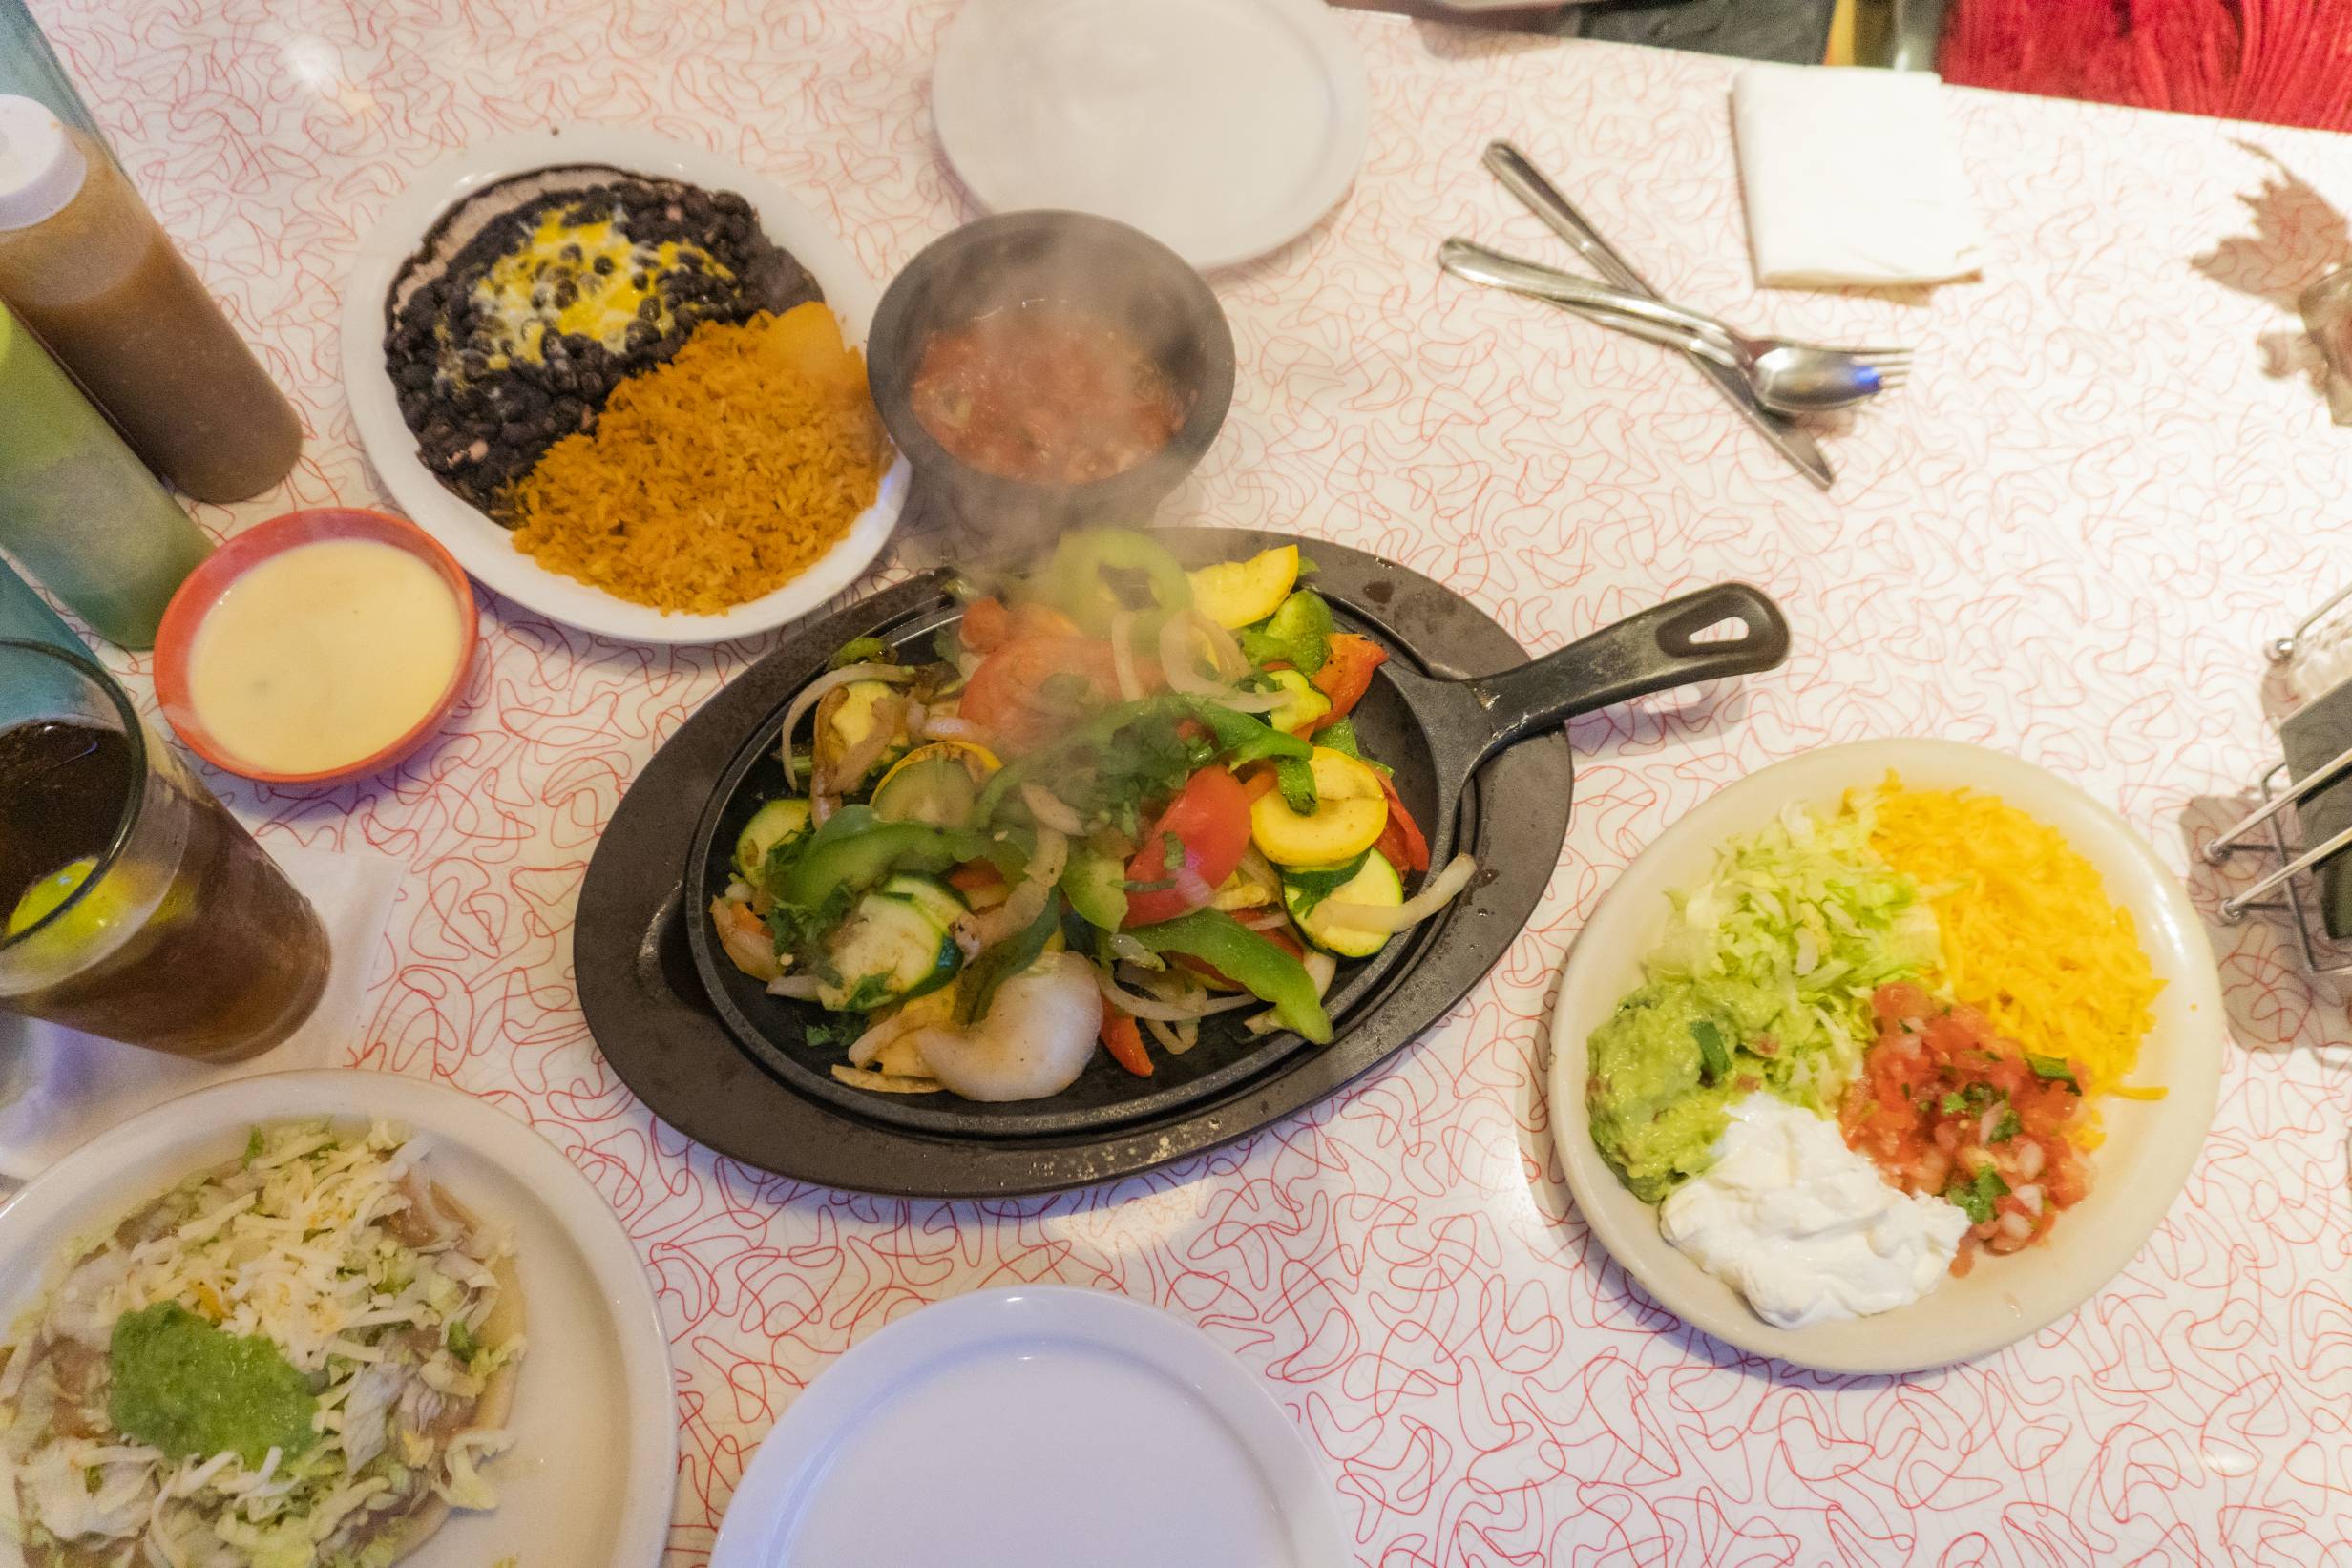 Vegetarian fajitas by Fiesta Cafe. A cast iron skillet sizzling with vegetables sits in the center. Black beans, rice, queso dip, salsa, and a plate filled with shredded cheese, lettuce, sour cream, pico de gallo, and guacamole are on the side. Photo by Adam Rahn. 